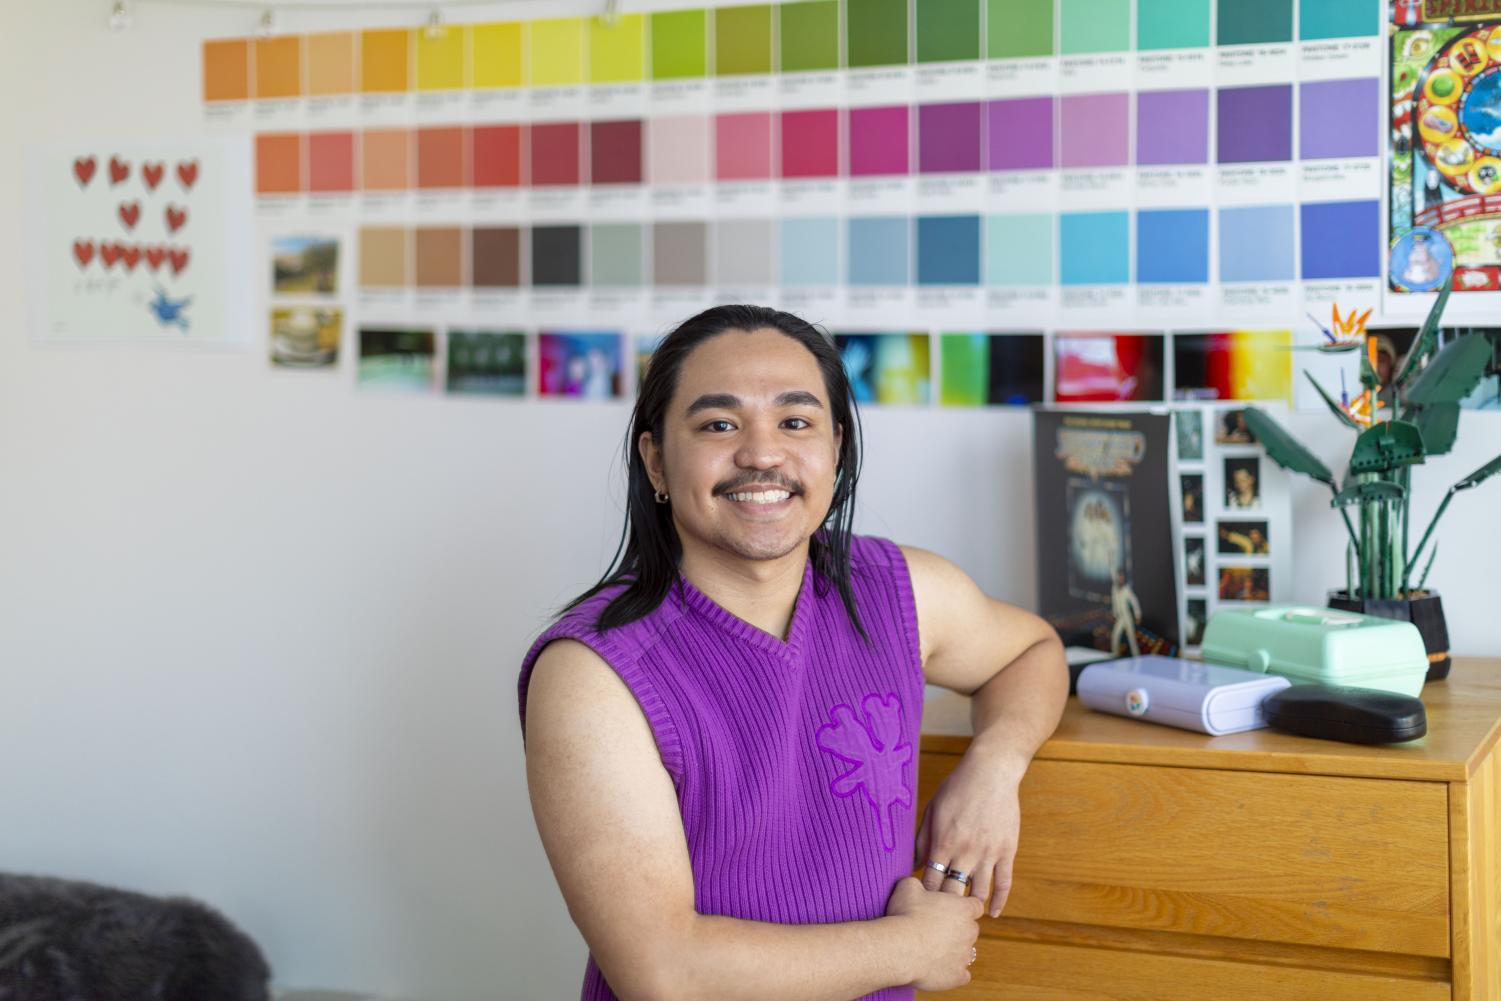 Wearing a sleeveless purple sweater, Khym Valenzuela looks at the camera with a smiling expression in his Gramercy dorm room. His left arm is resting on the top of his dresser. On the dresser, sits a green Lego plant. Khym is standing in front of his wall that has multi-colored pantone swatches.